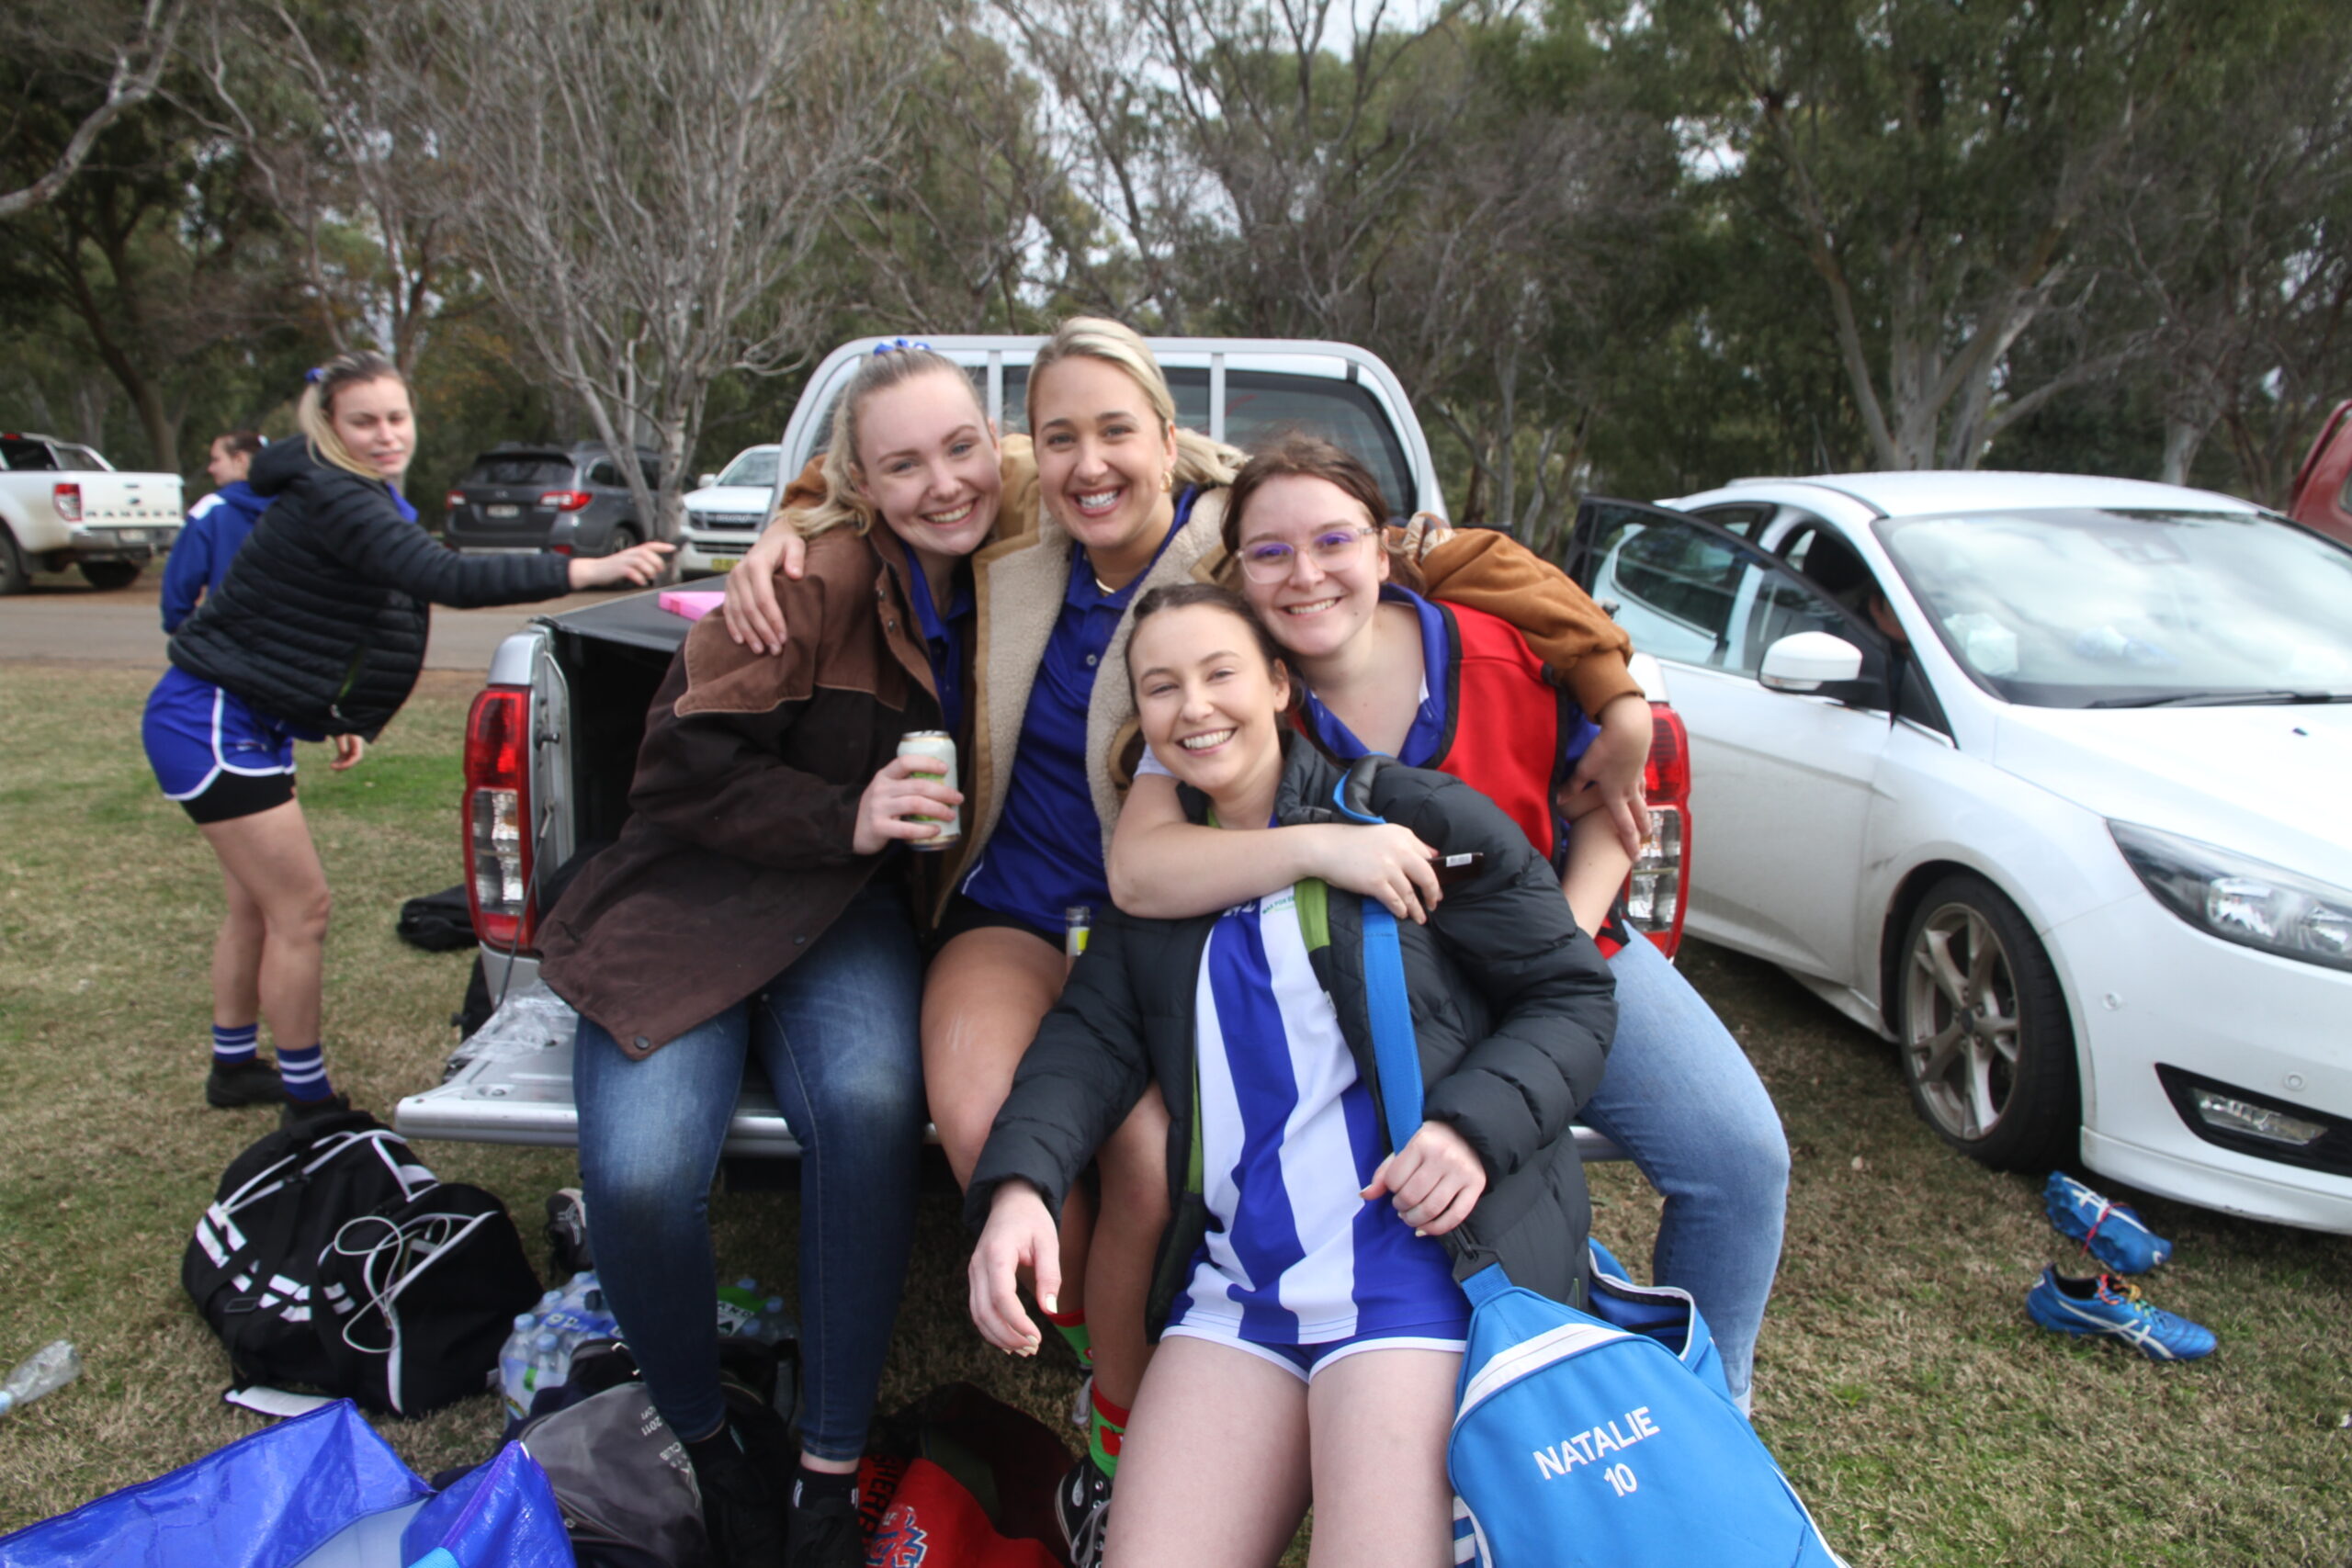 Melanie Young, Stacey Shorley, Angelina Corney and Margaret Deeves at the AFL.